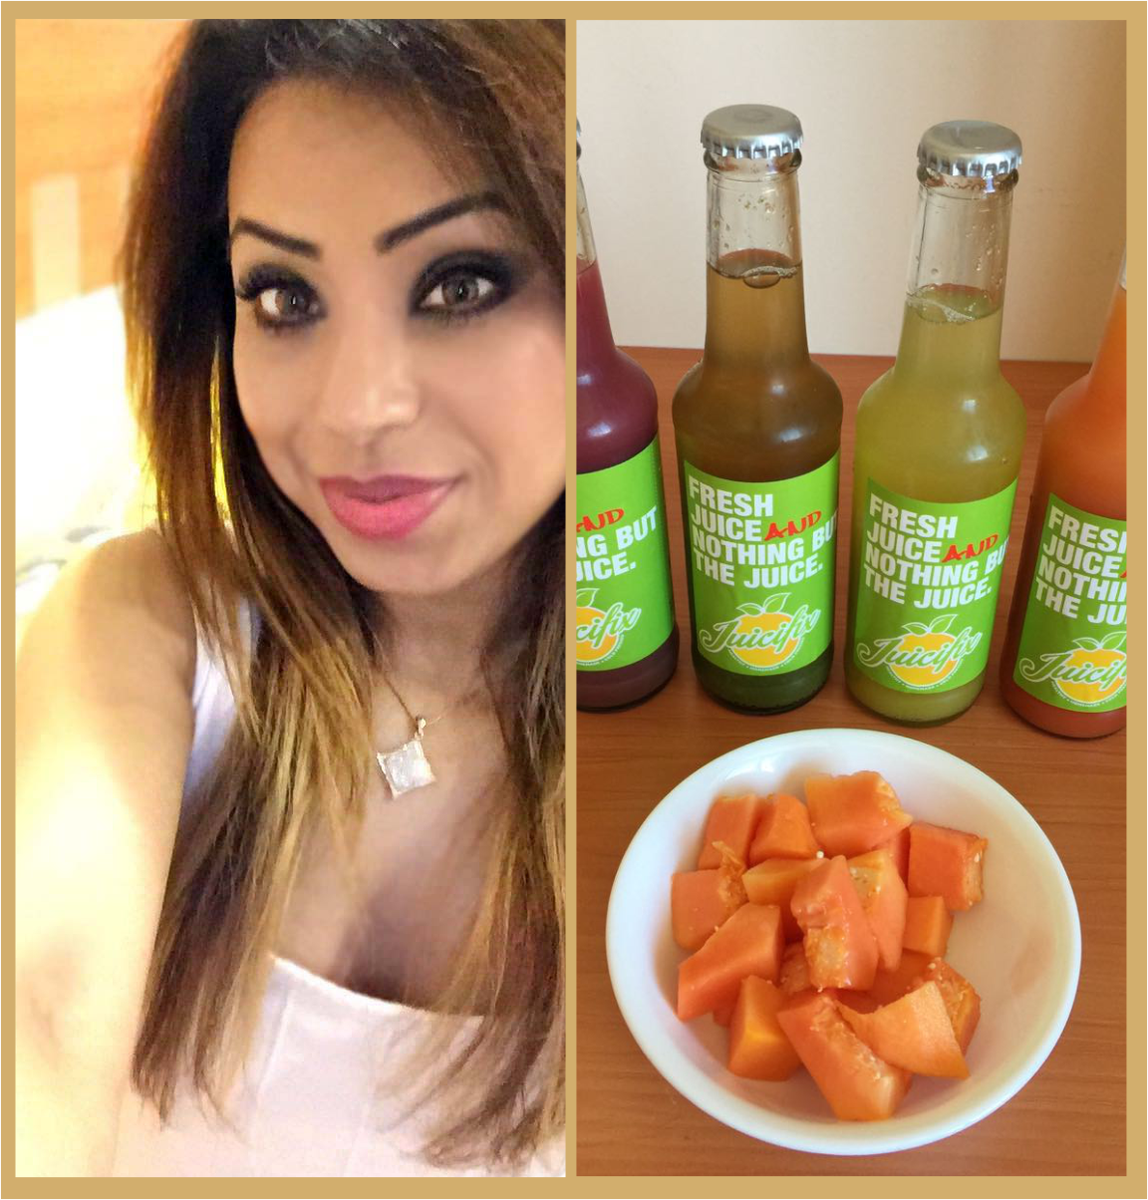 5 bottles per day to keep the toxins at bay! Prepping up for the New Year glow...#Detoxify #DetoxDiet #HealthJuices #Health #Fitness #Raina